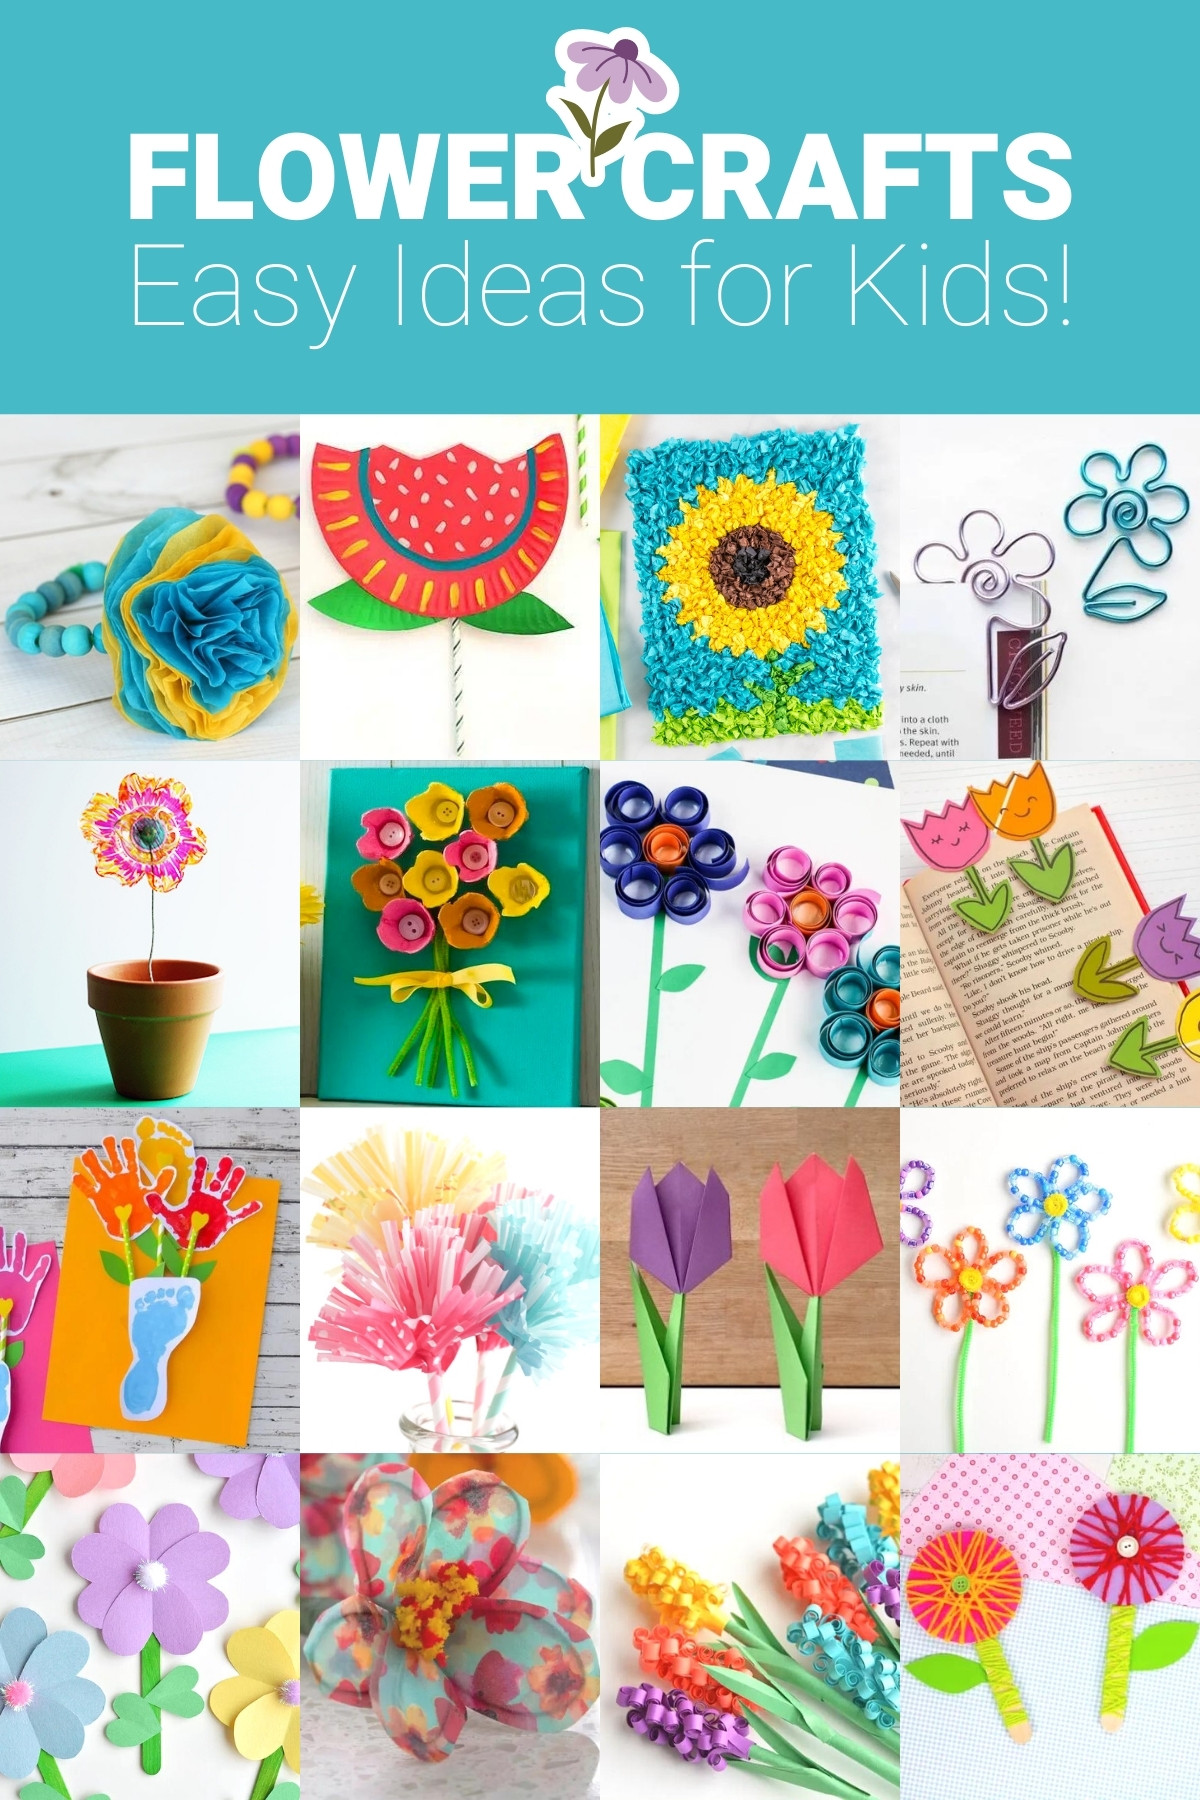 Crafts For Kids - Tons of Art and Craft Ideas for Kids to Make